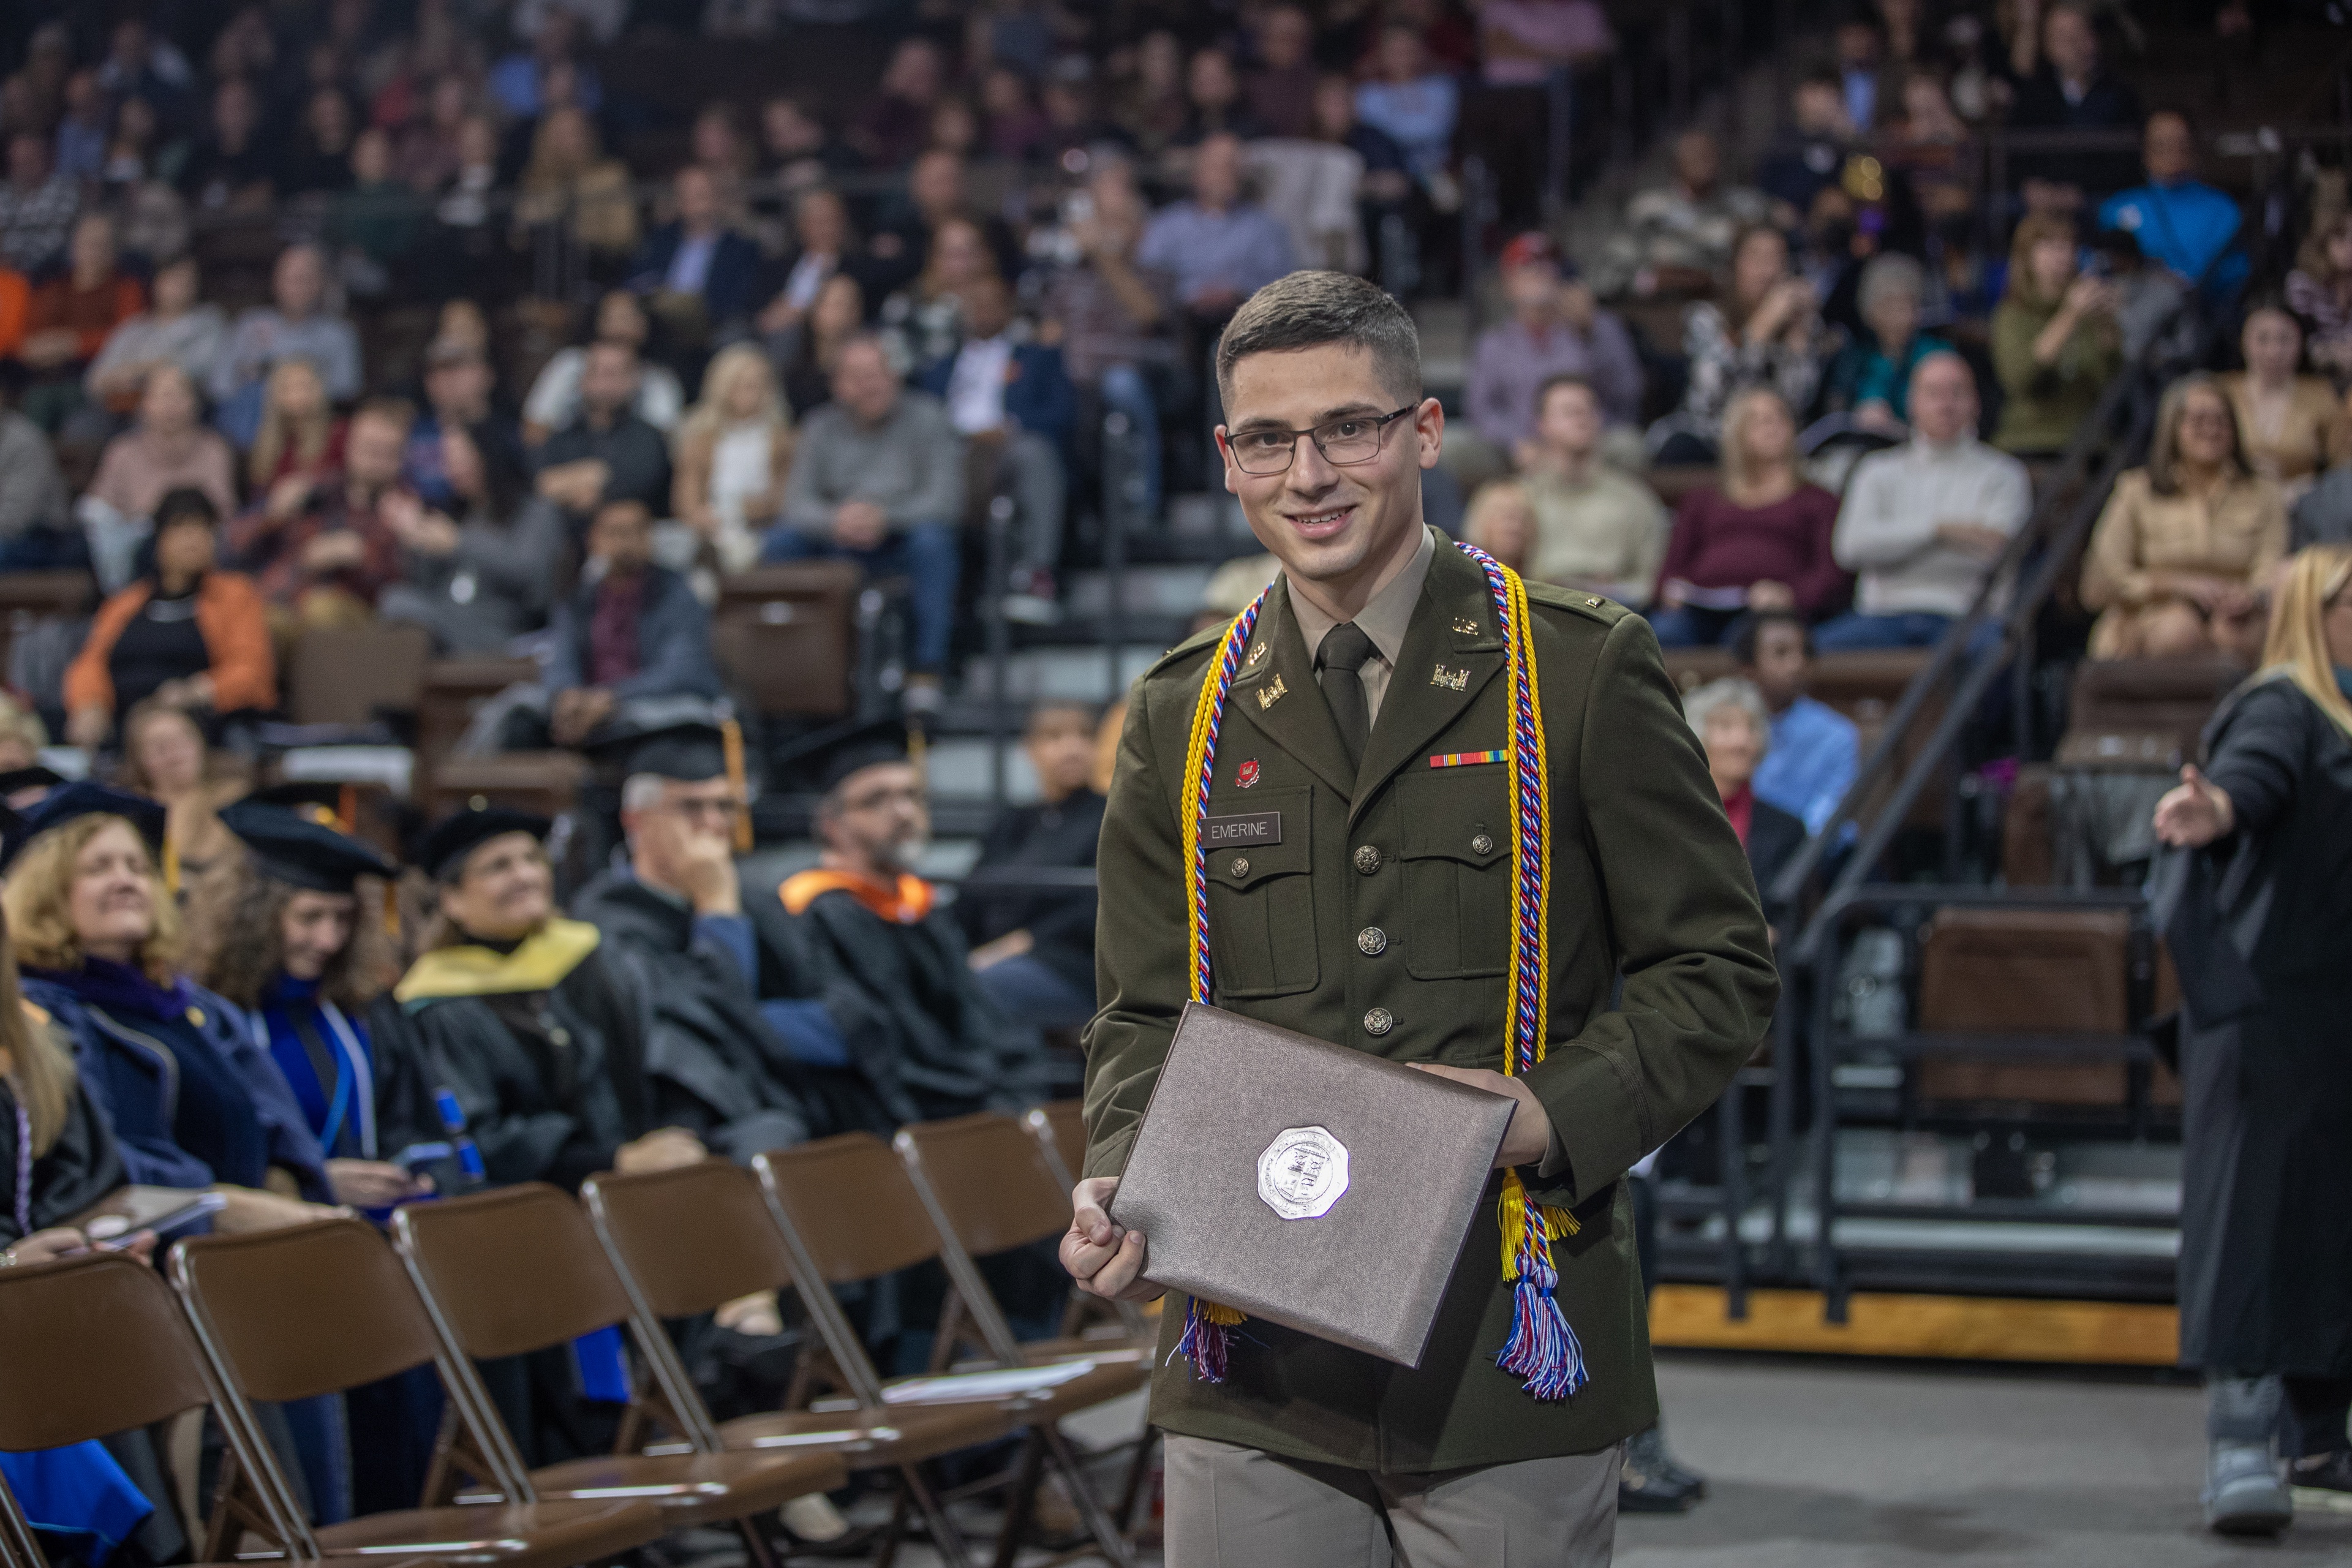 Student military member holds his diploma cover